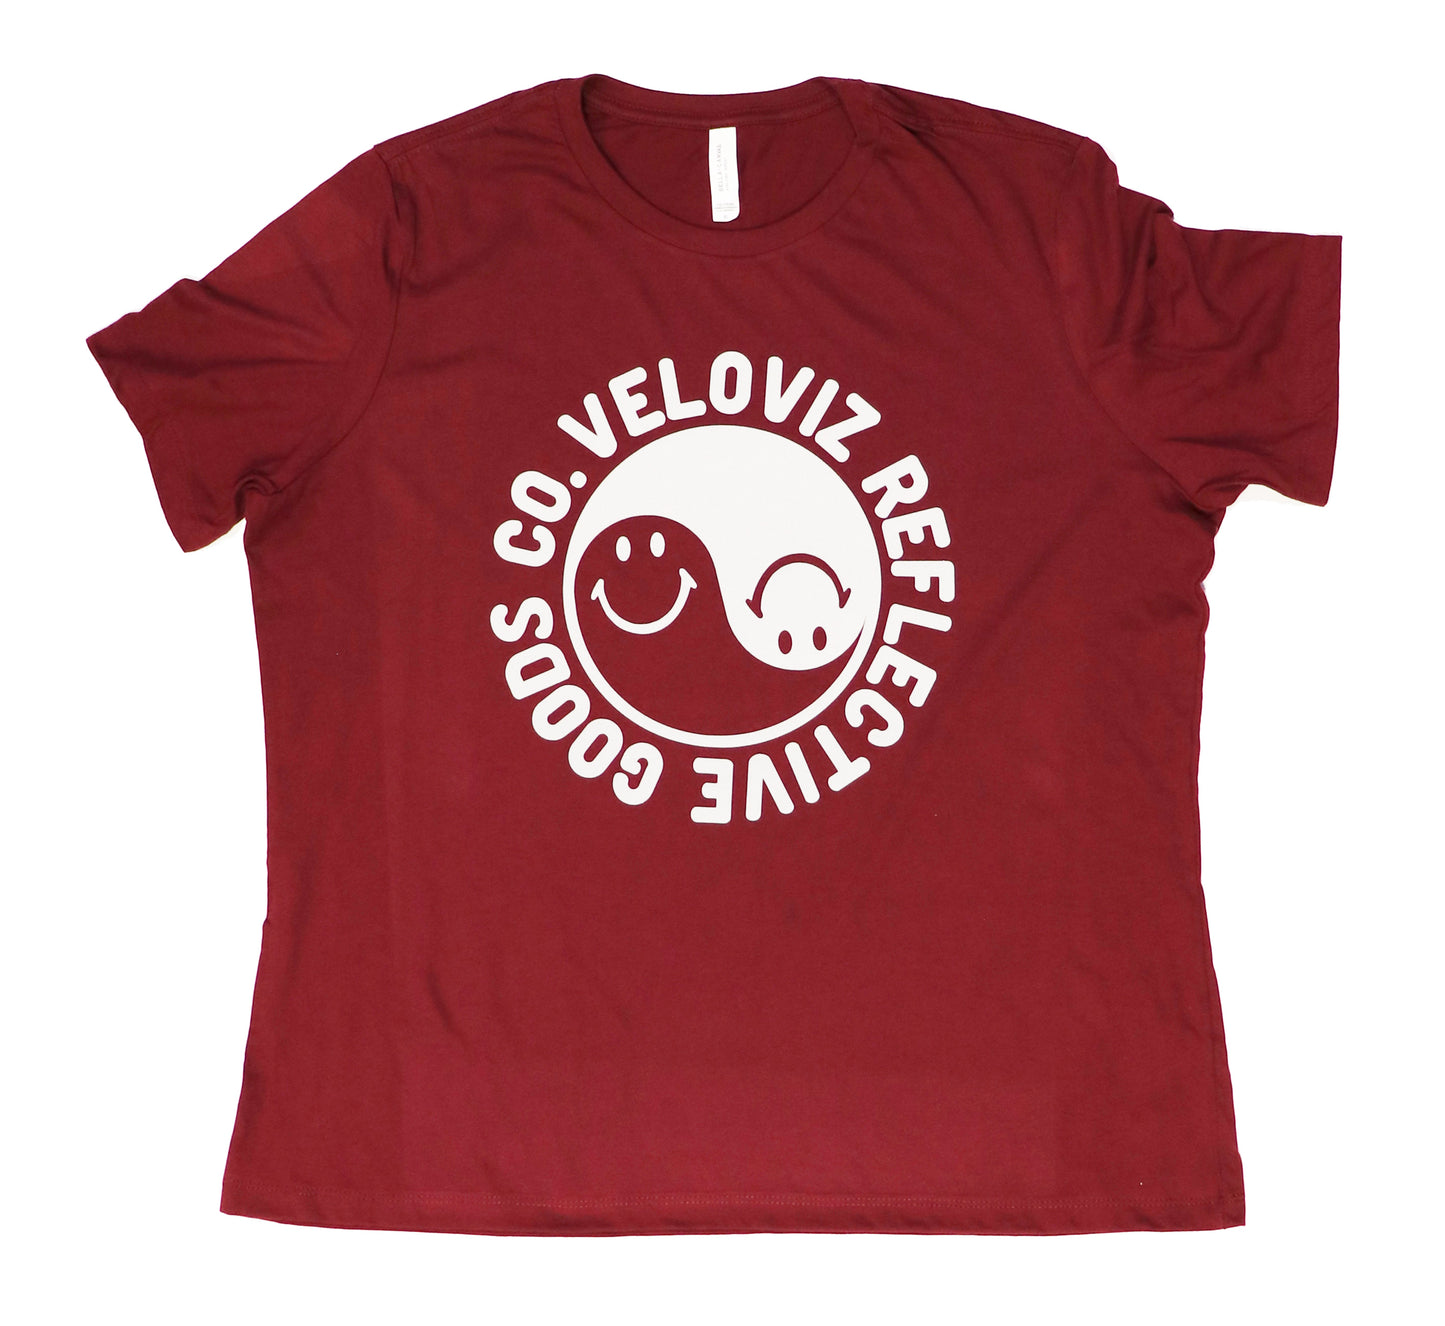 Reflective T Shirts - Reflective Goods Co - Red (Womens)